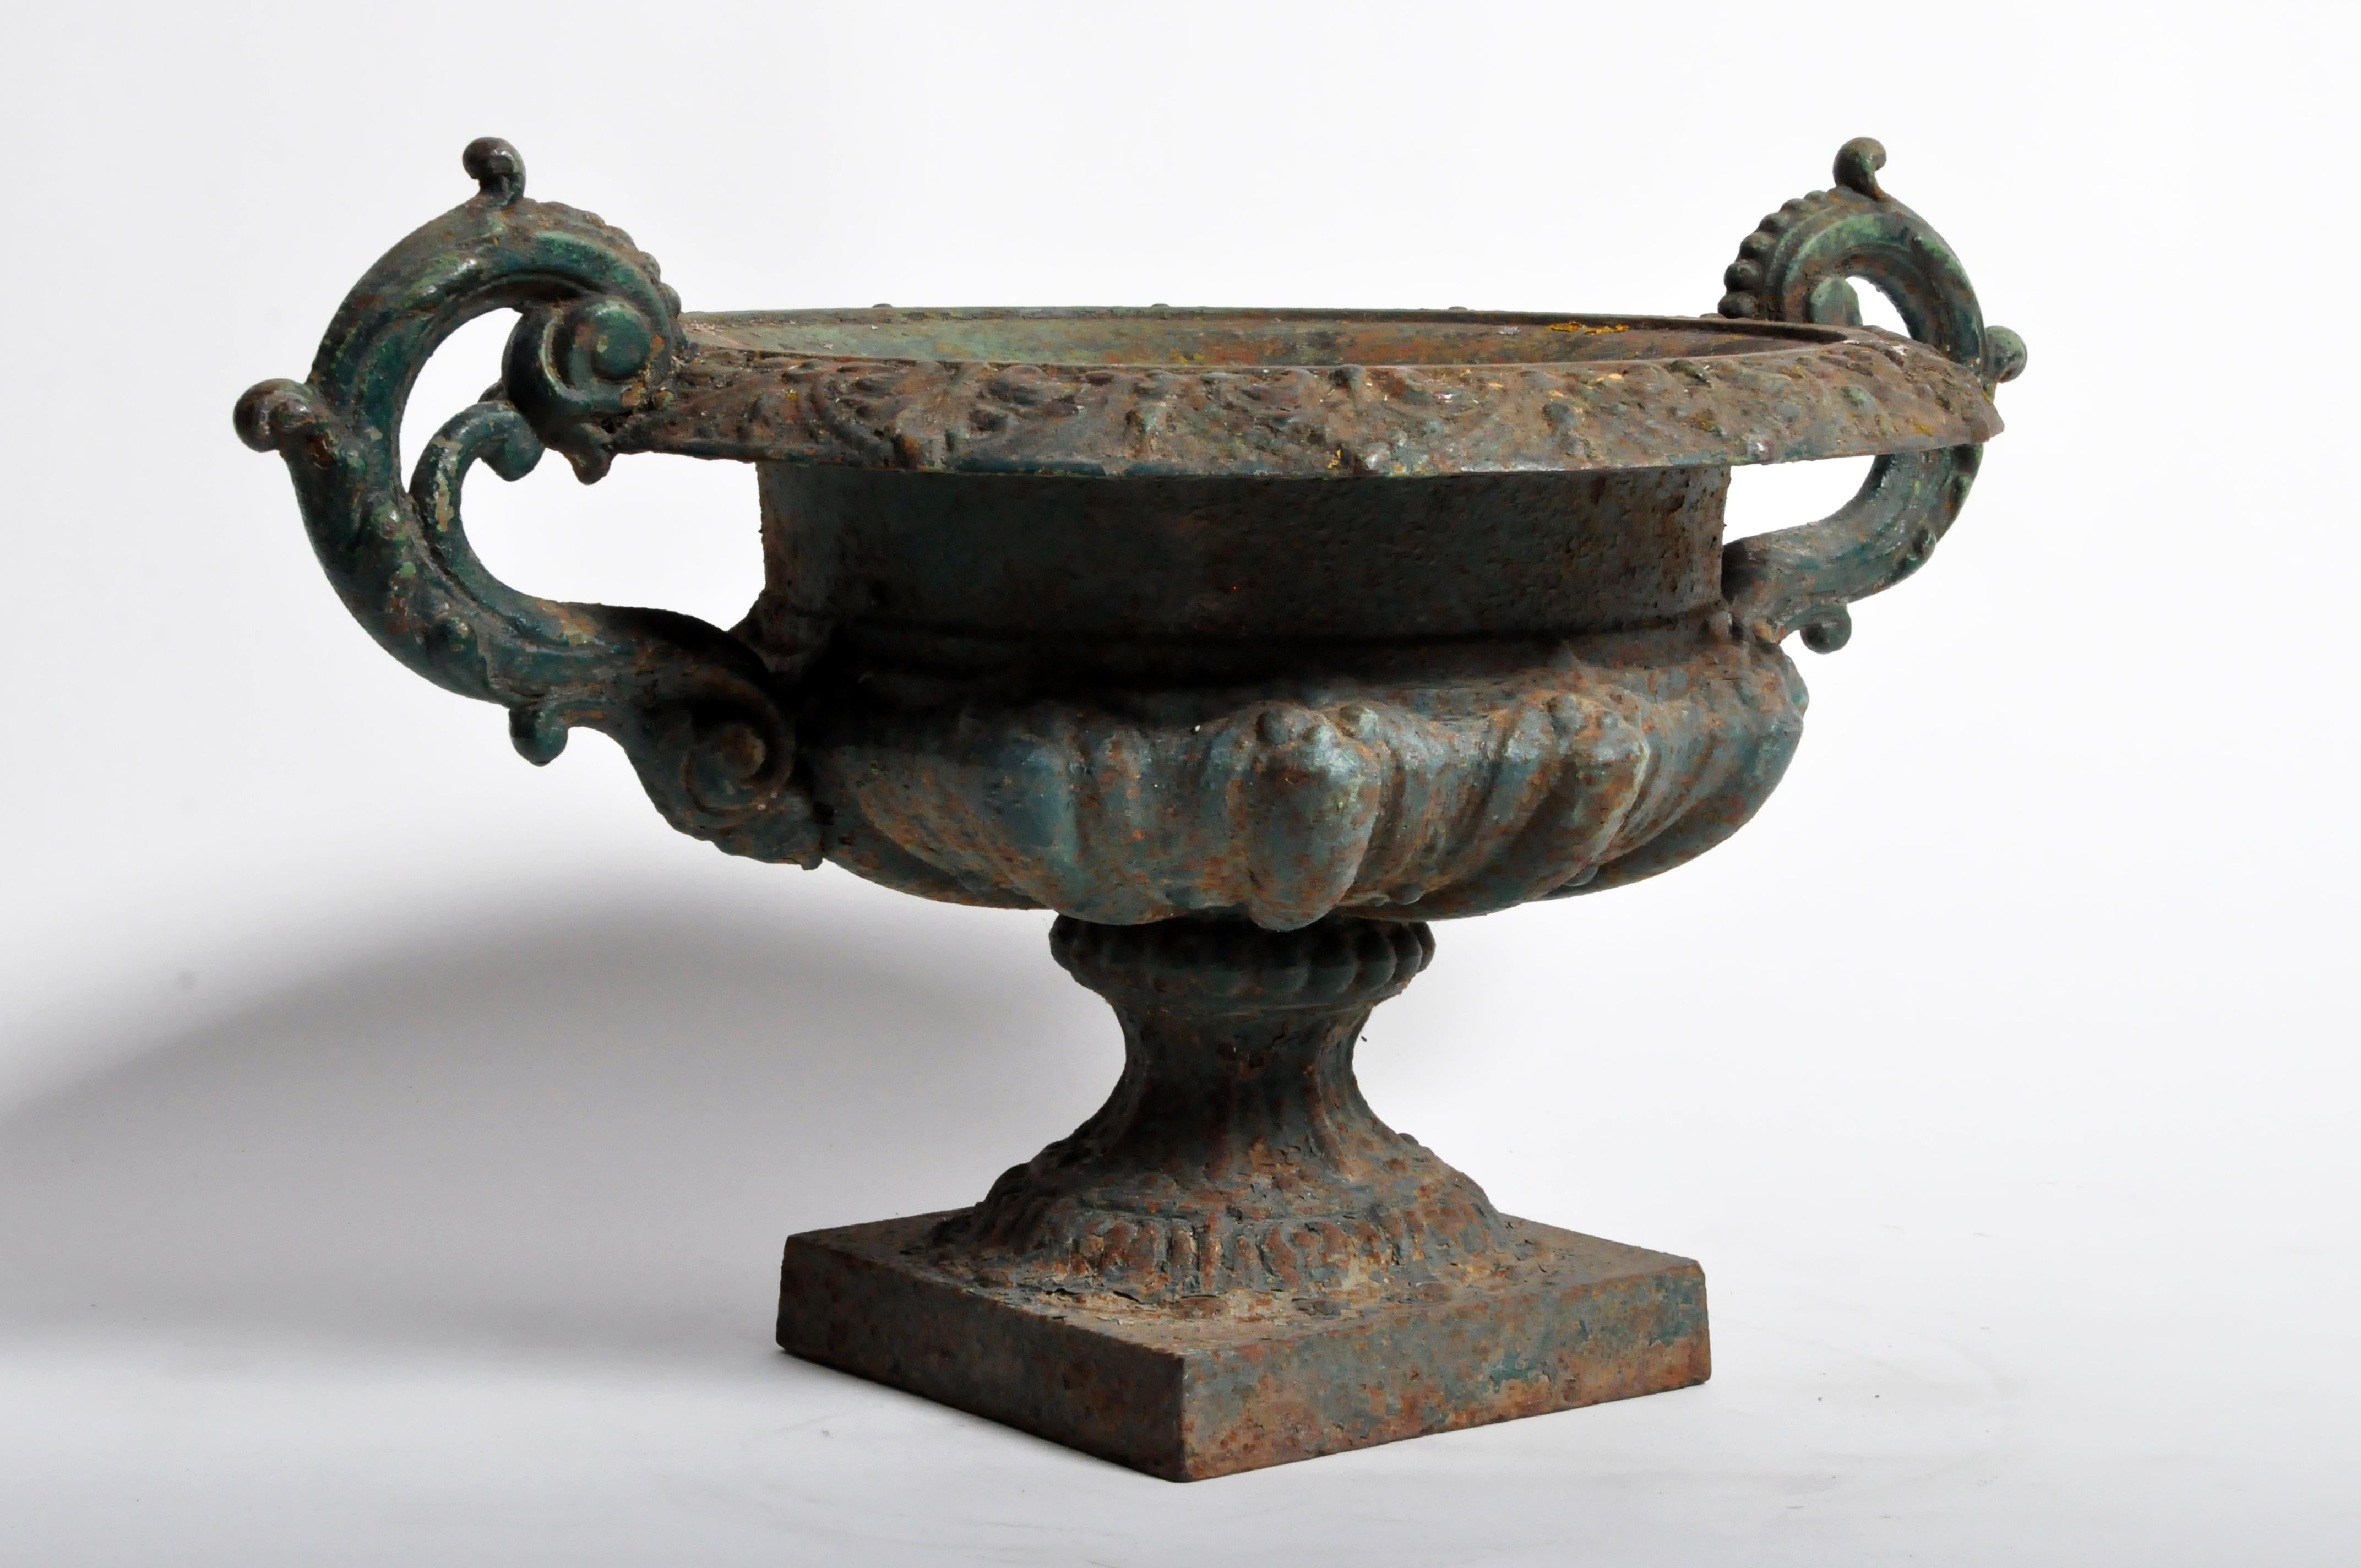 A planter from Paris, France made from cast iron and original green paint, 19th century. A well-formed and graceful design with large curling arms and excellent patina. Wear consistent with age and use.
  